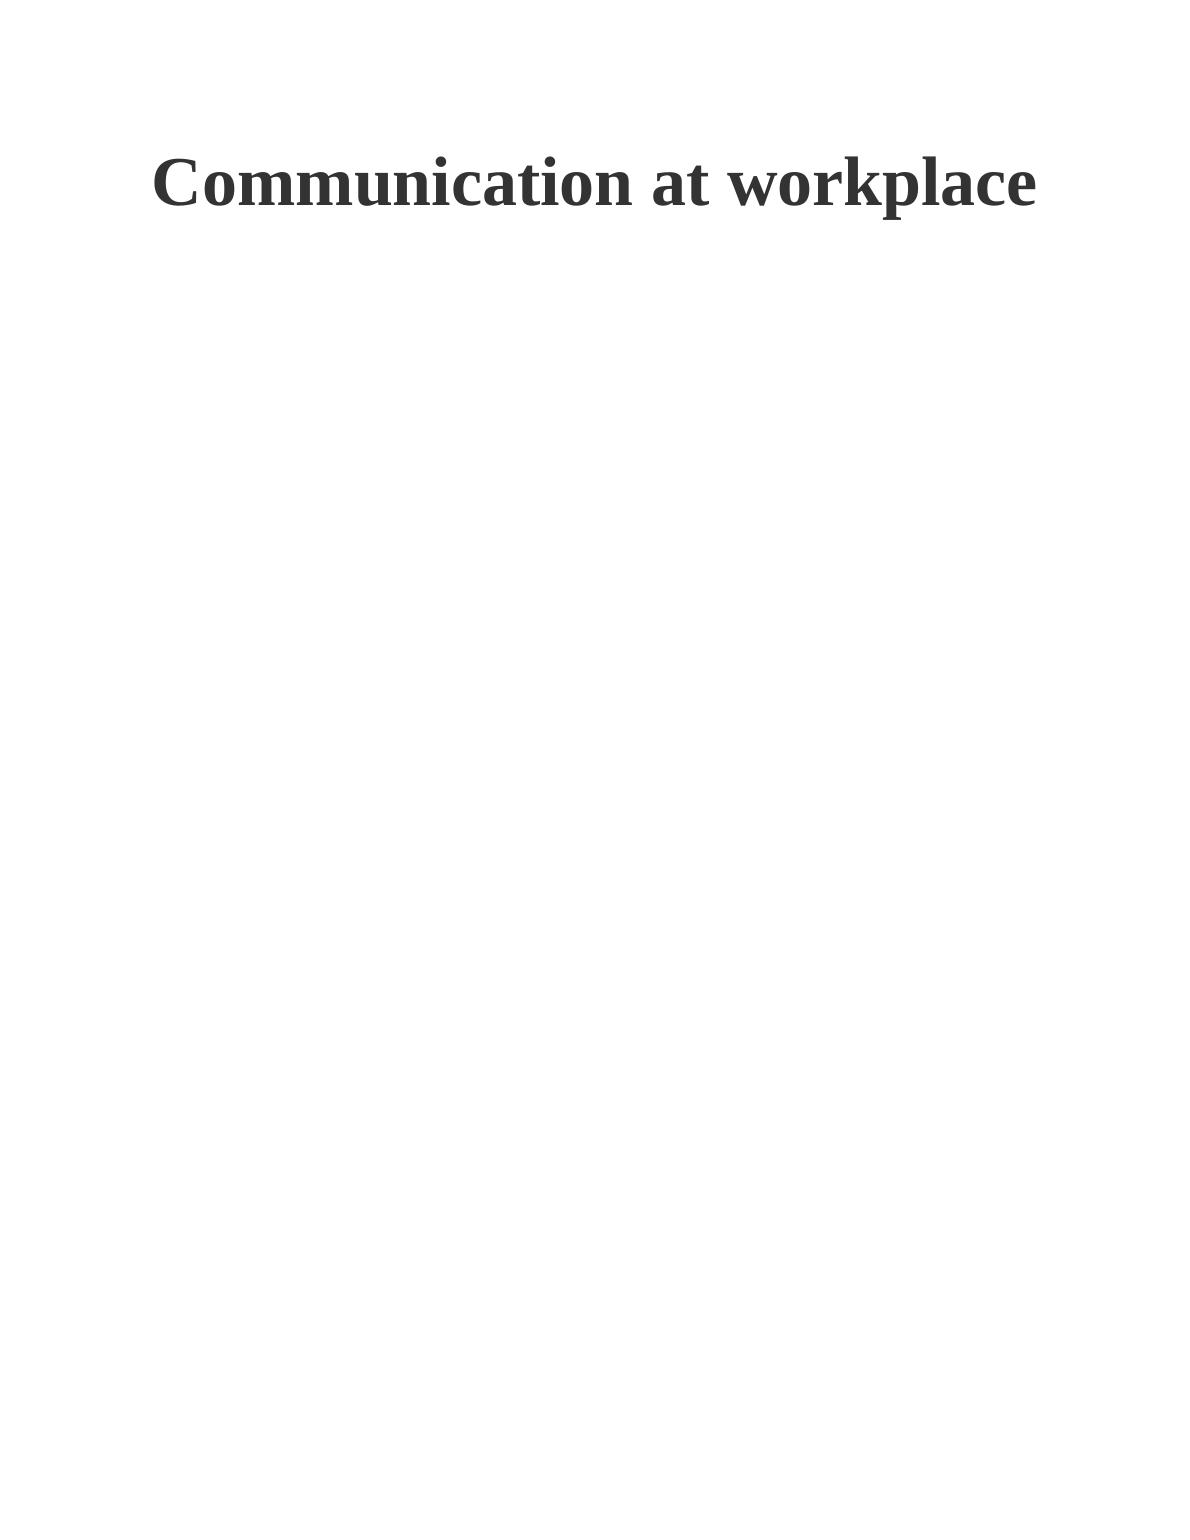 Workplace Communication | Assignment_1